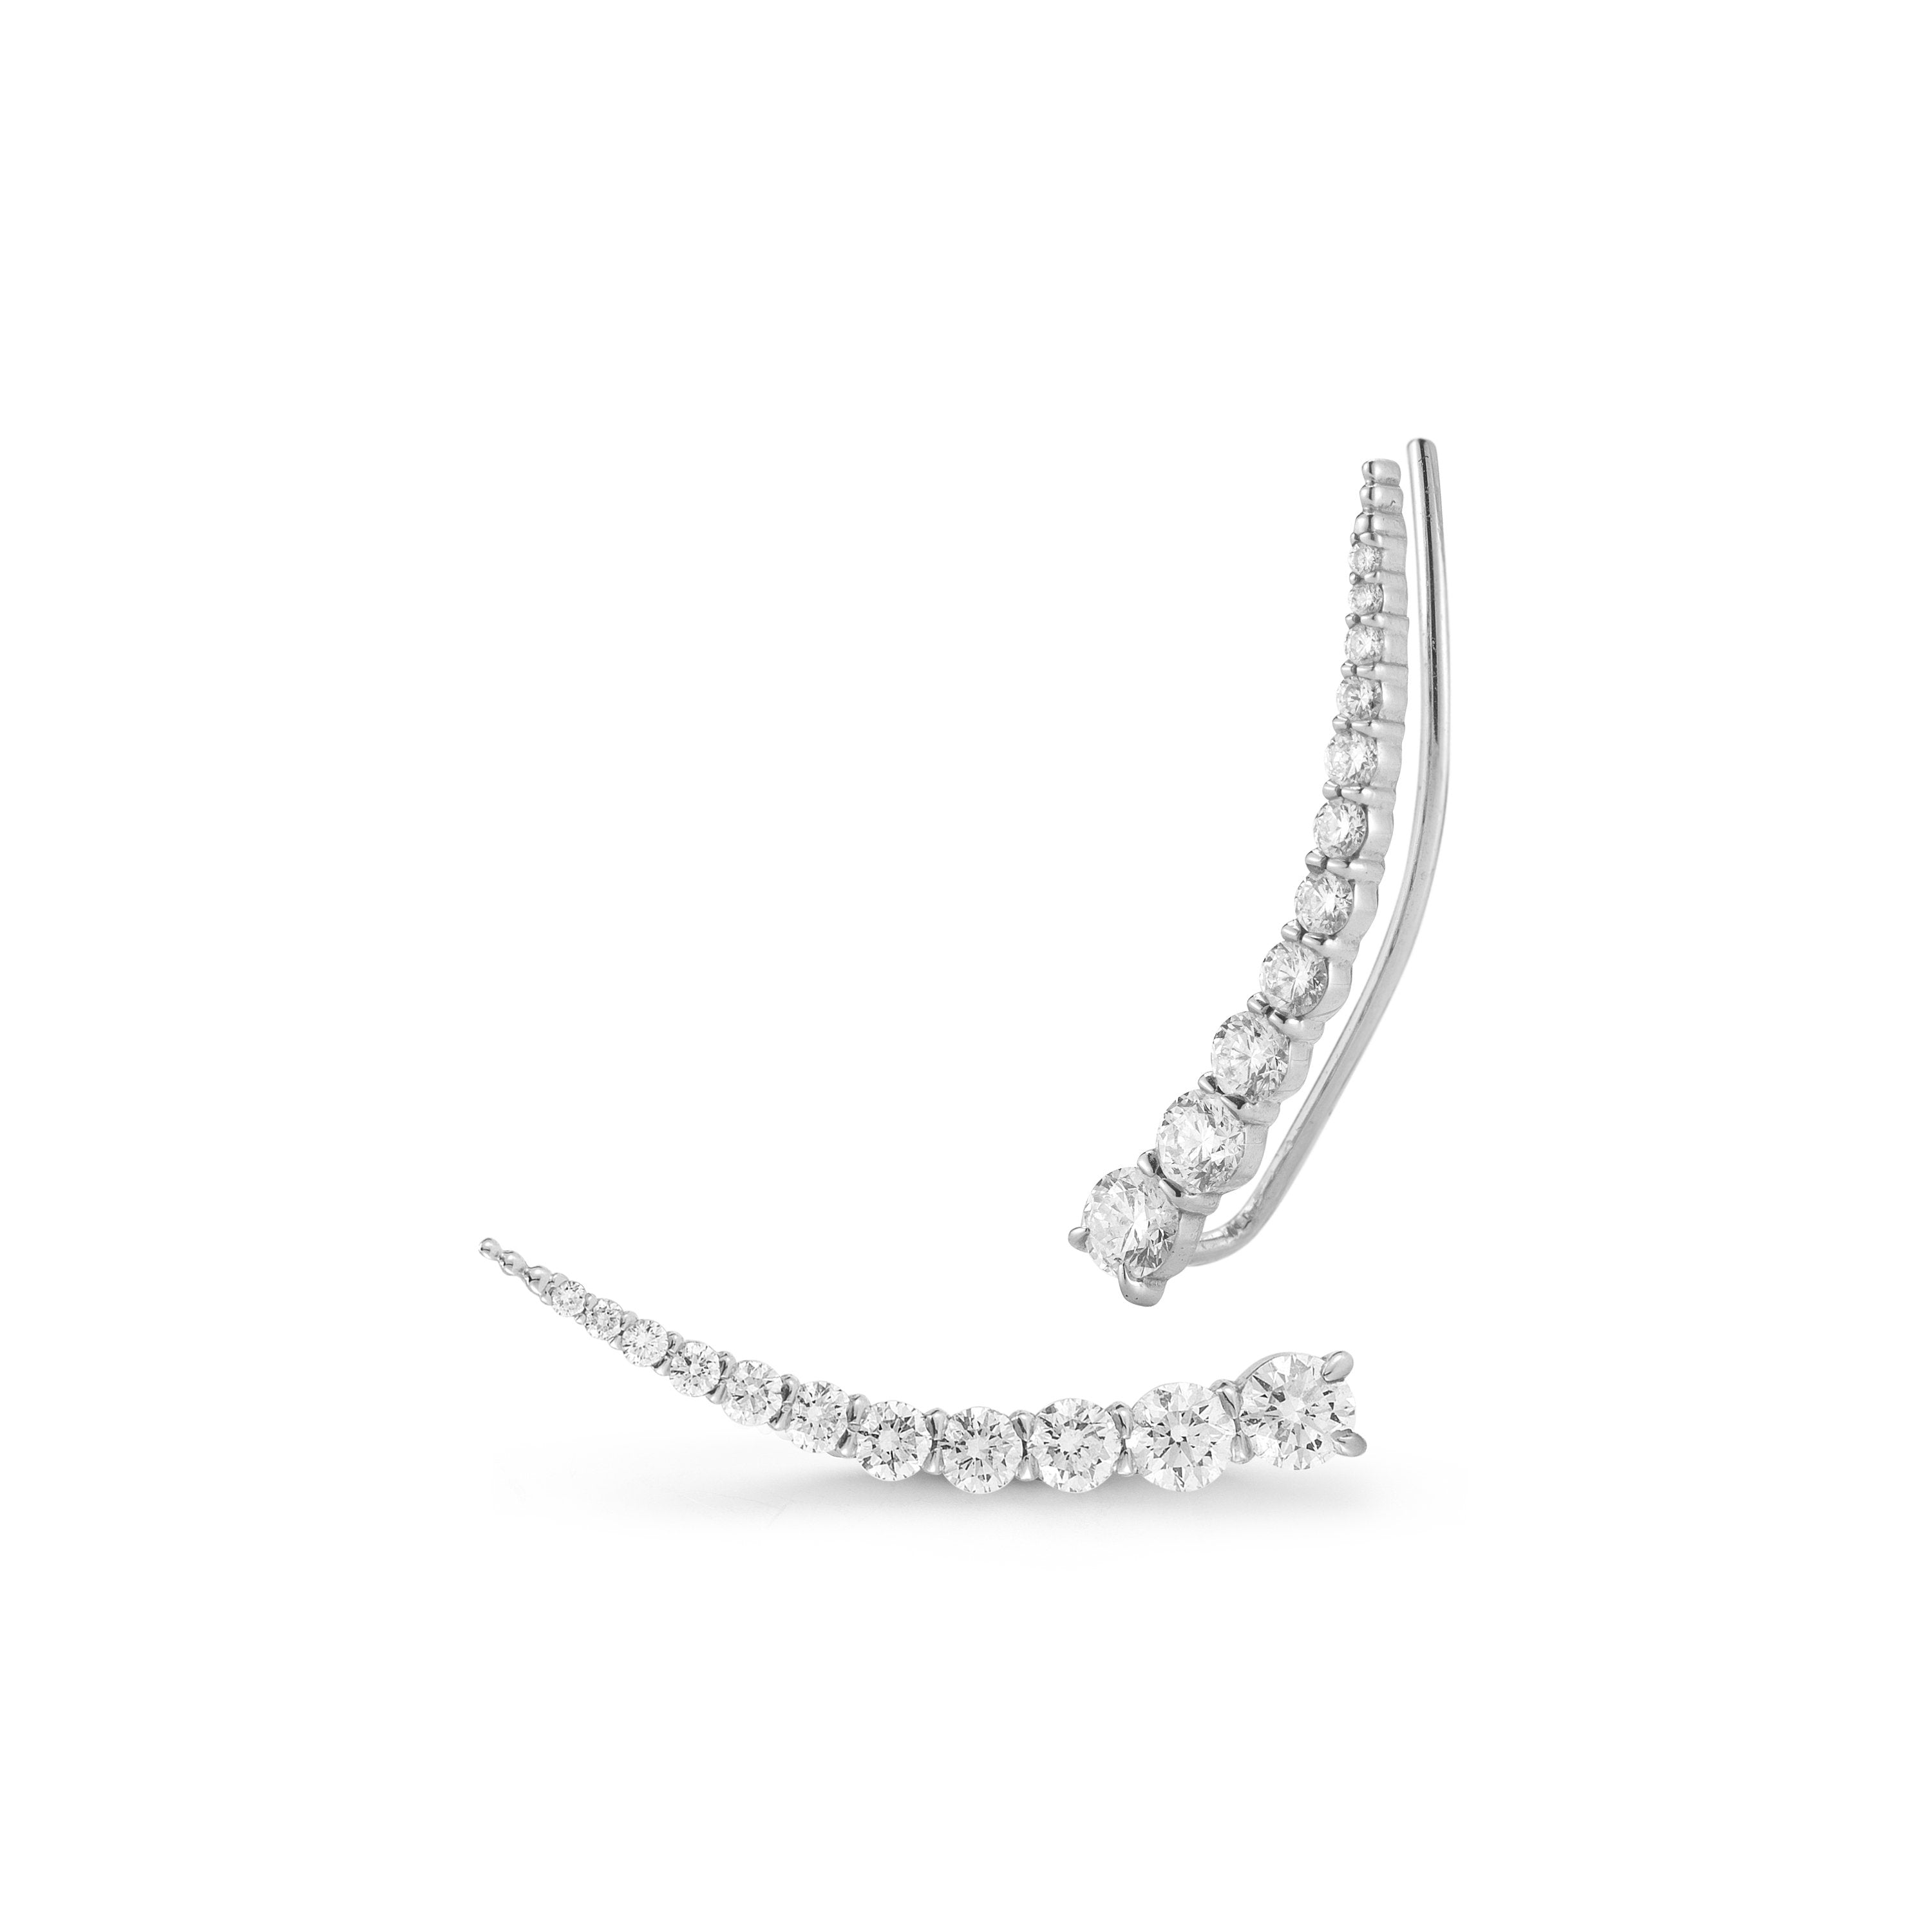 Large Luna Ear Climbers in 18K White Gold